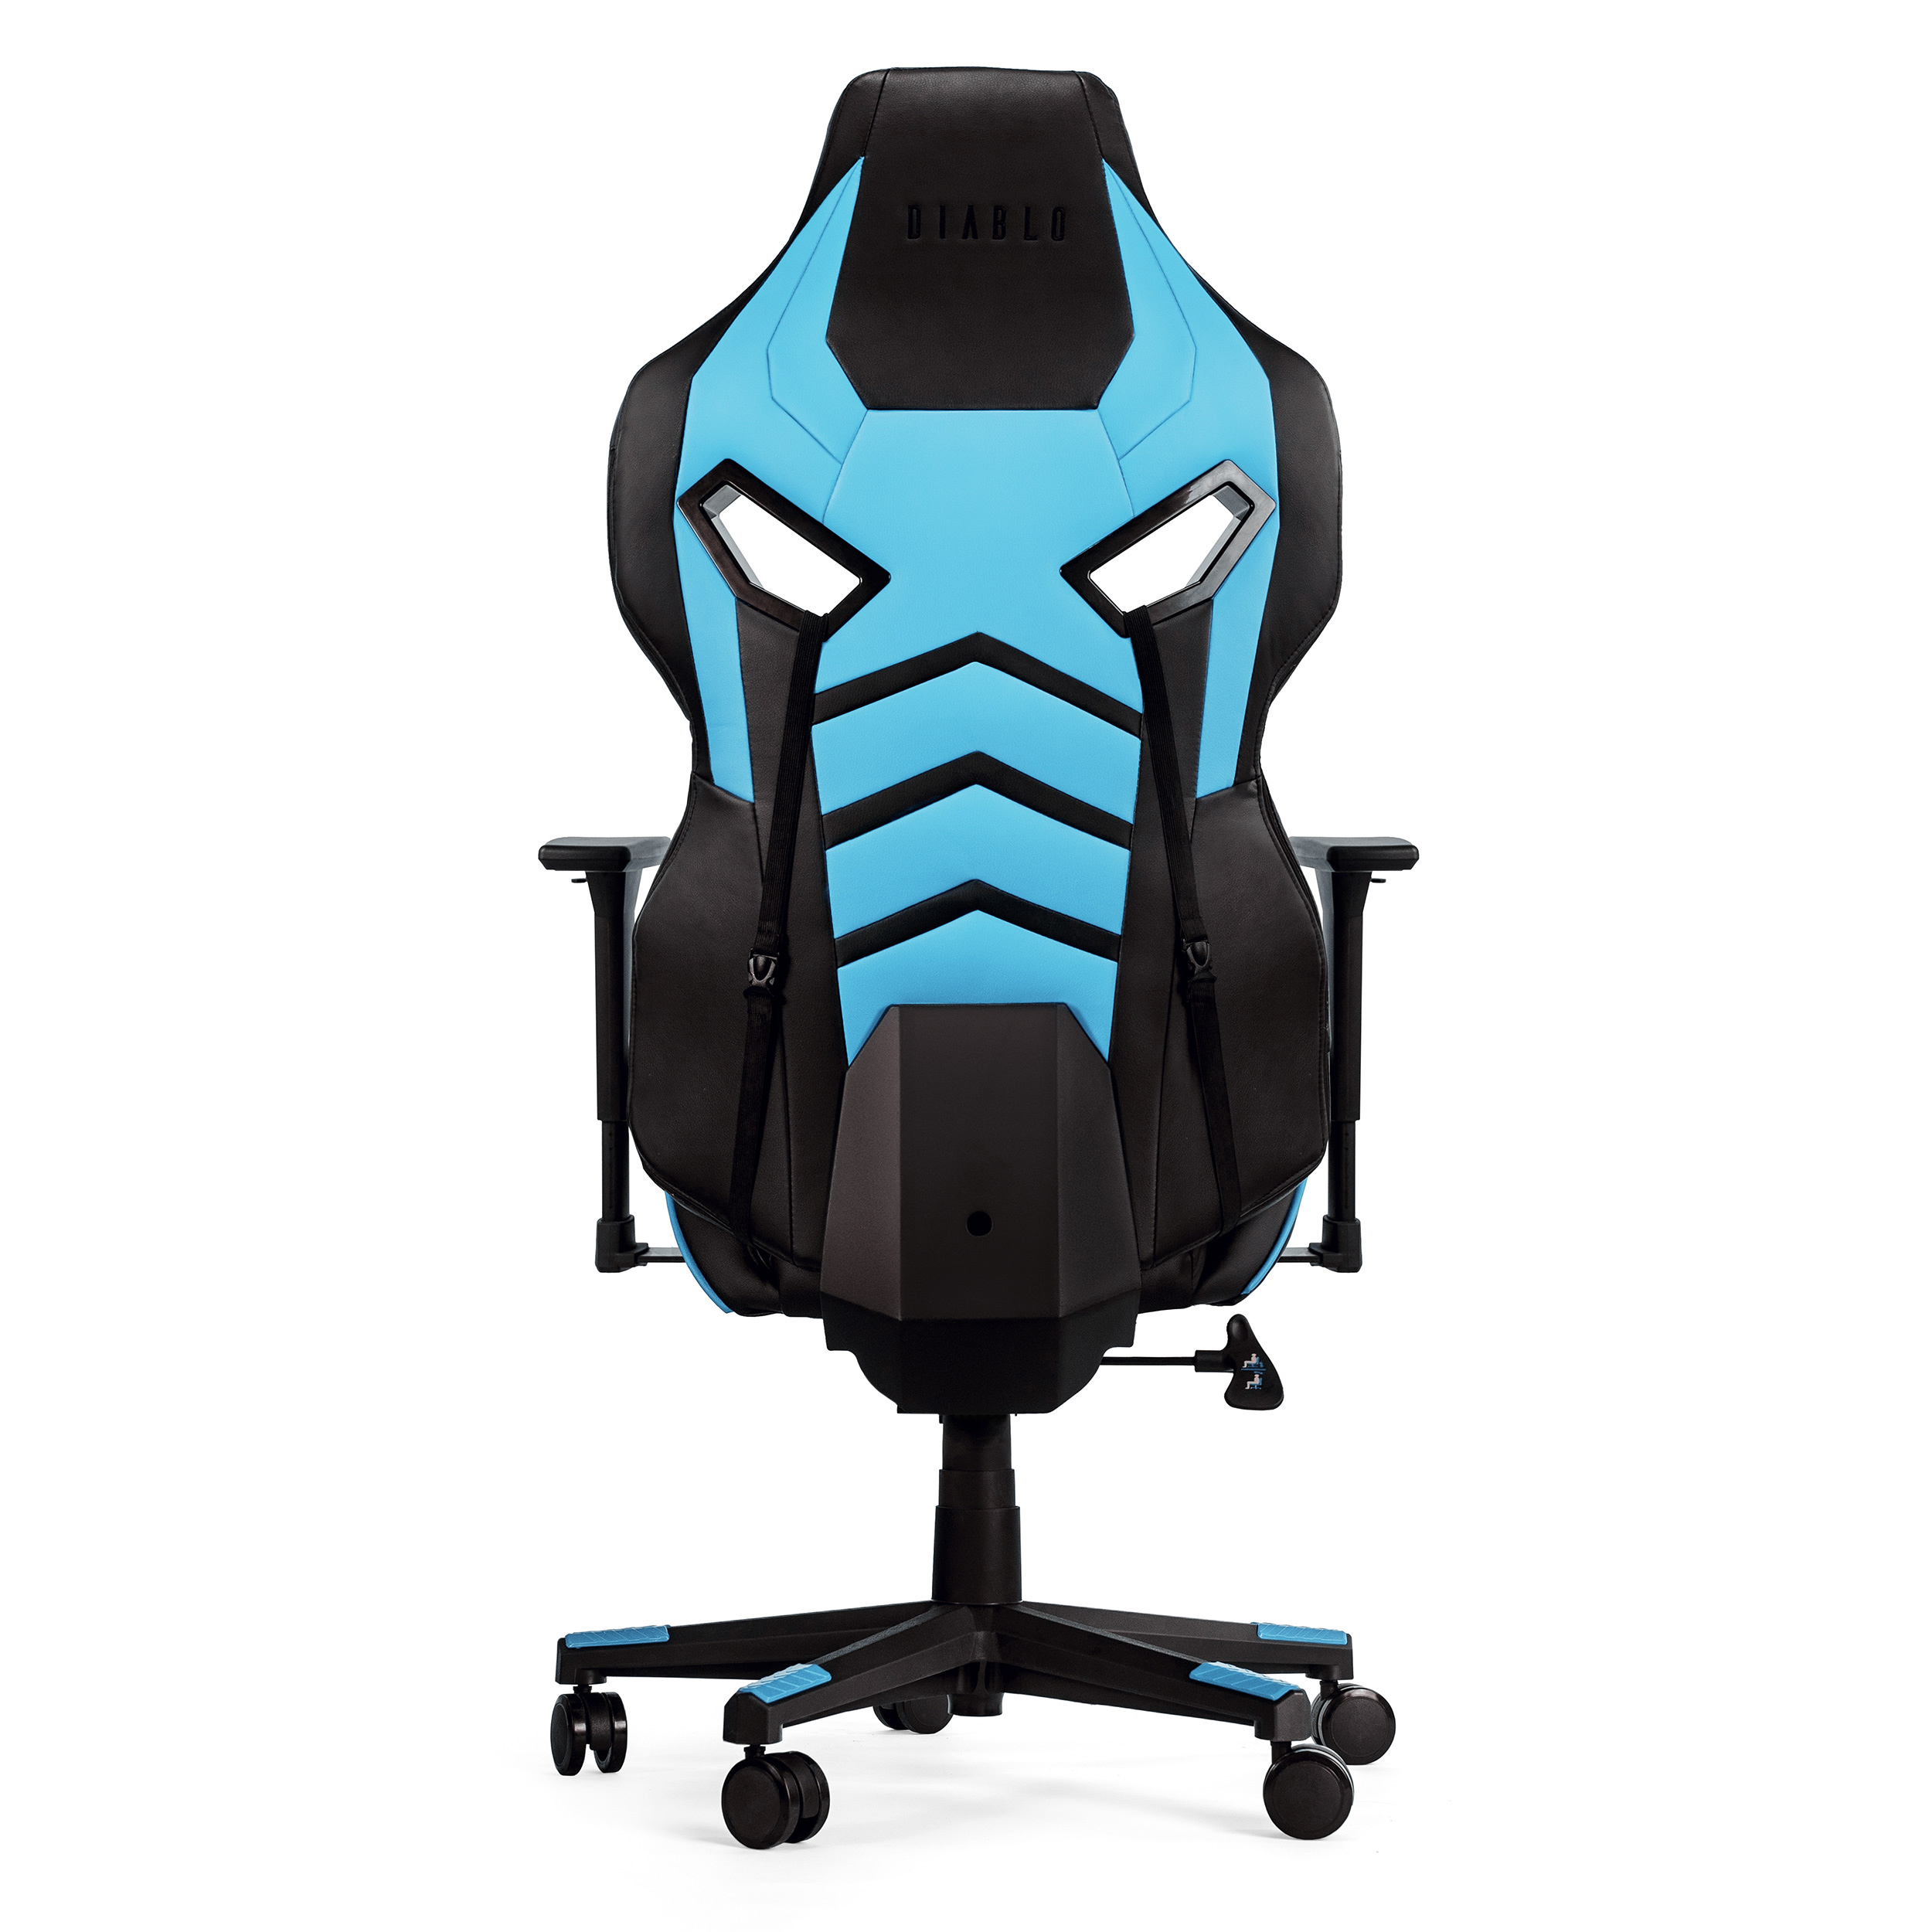 DIABLO CHAIRS Chair, GAMING STUHL NORMAL Gaming X-FIGHTER black/blue